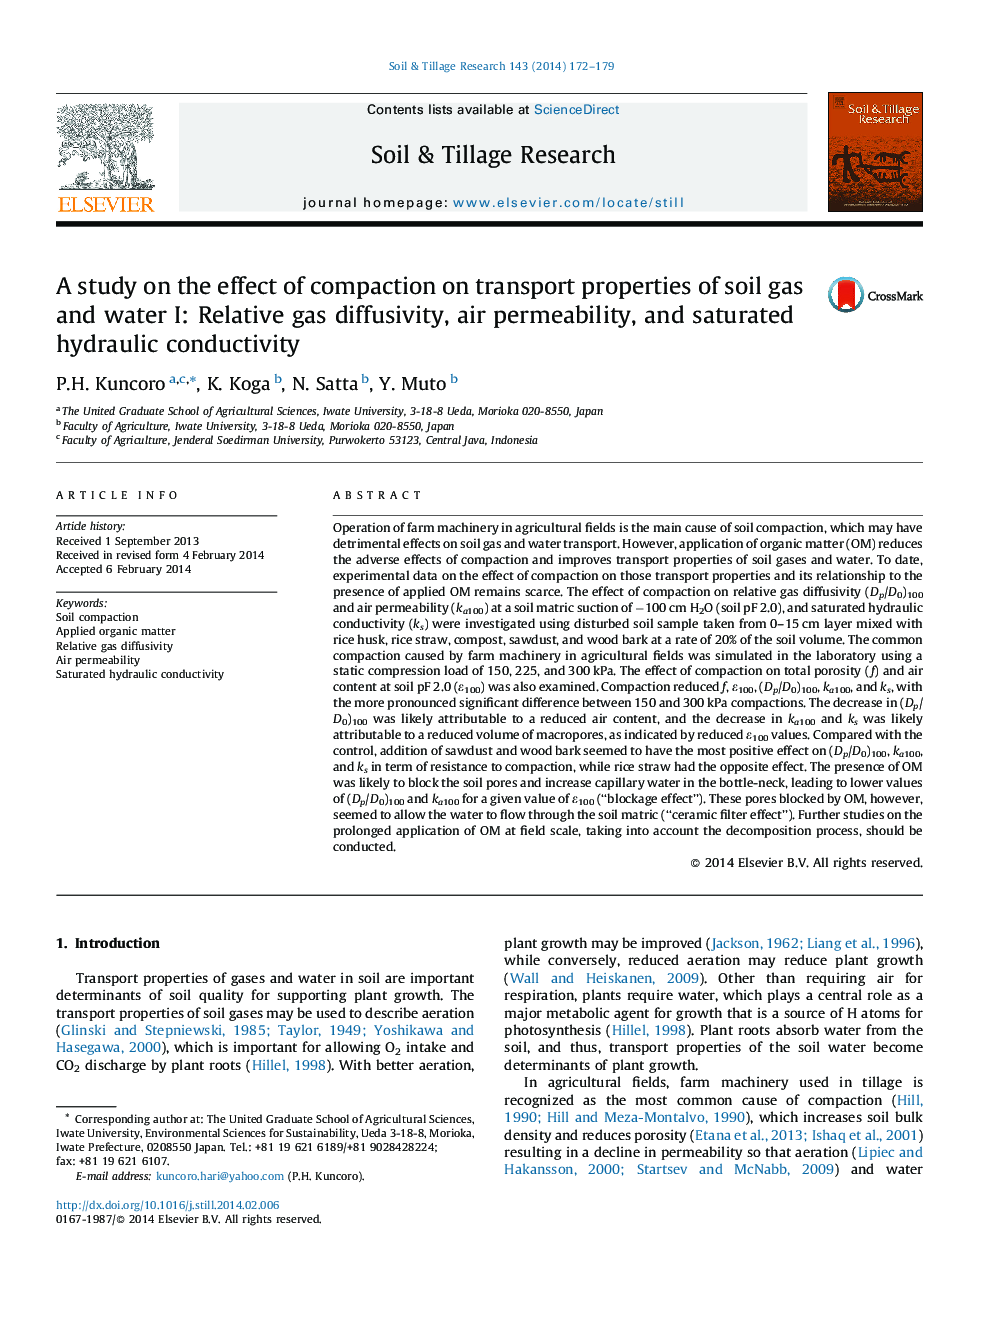 A study on the effect of compaction on transport properties of soil gas and water I: Relative gas diffusivity, air permeability, and saturated hydraulic conductivity